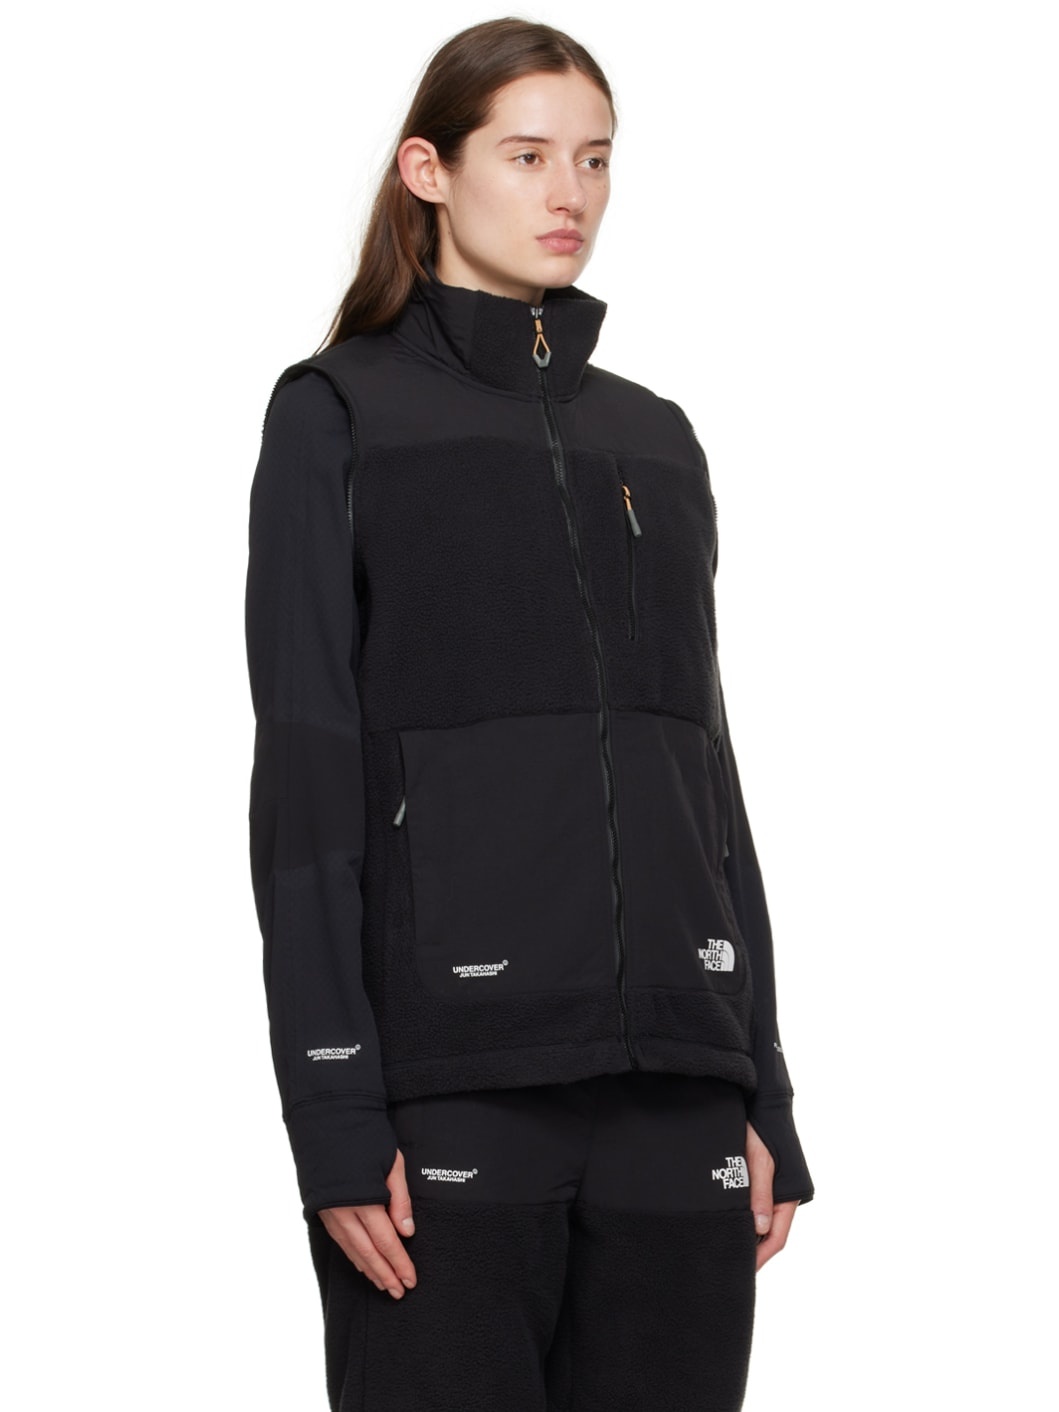 Black The North Face Edition Jacket - 5